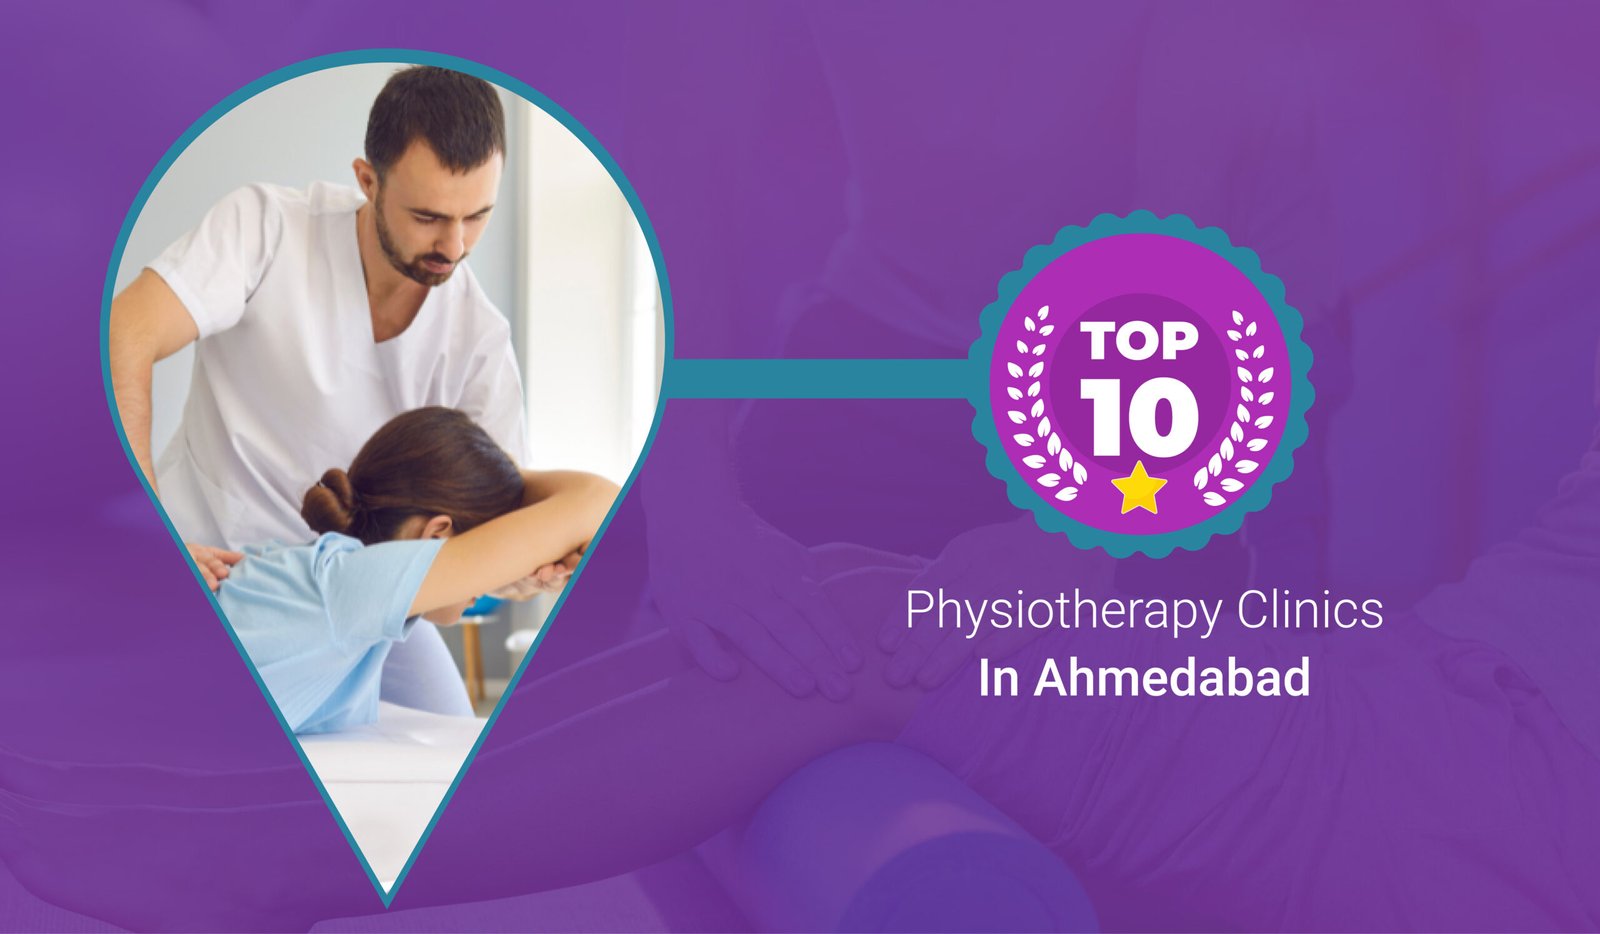 https://physiotherapistahmedabad.com/wp-content/uploads/2023/02/Top-10-Physio-Therapy-Clinics-in-Ahmedabad-scaled.jpg